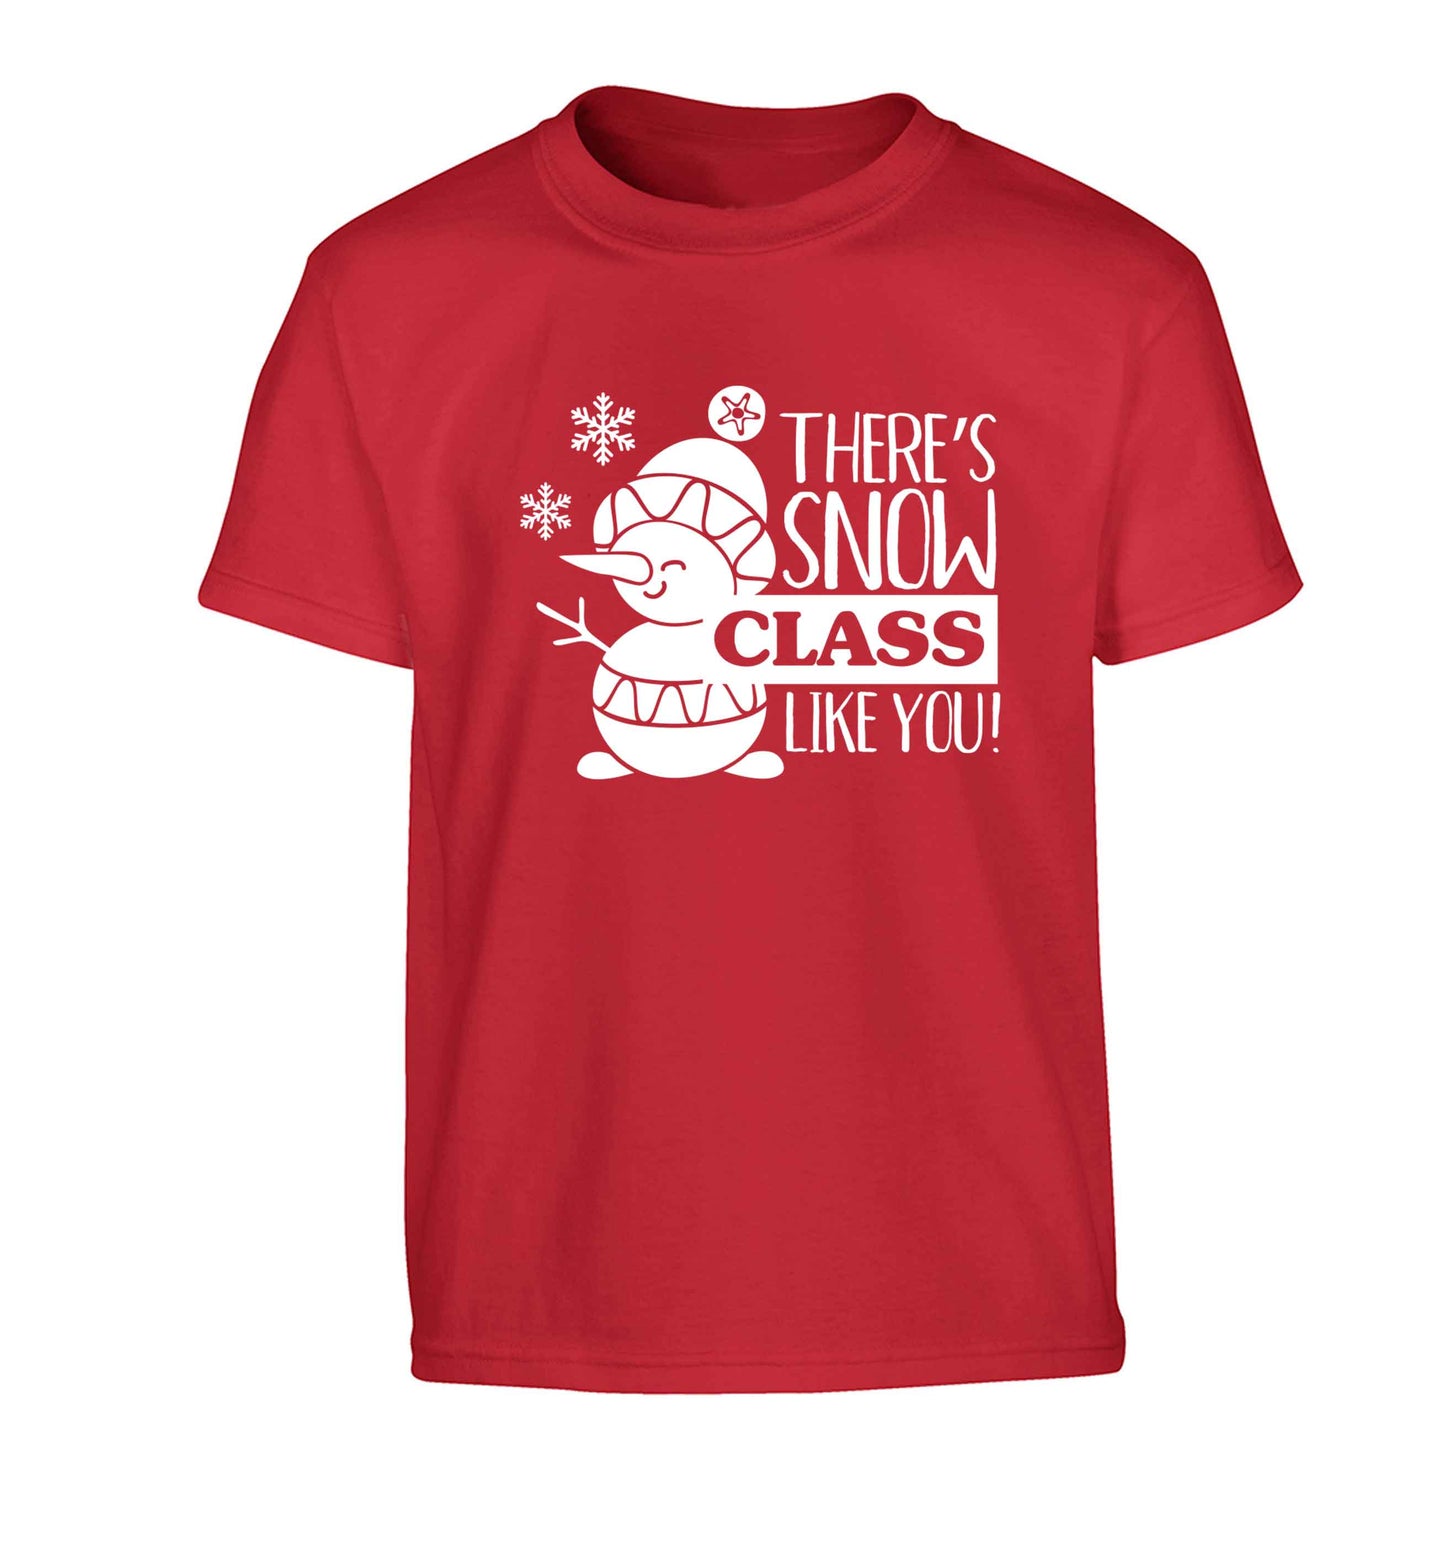 There's snow class like you Children's red Tshirt 12-13 Years